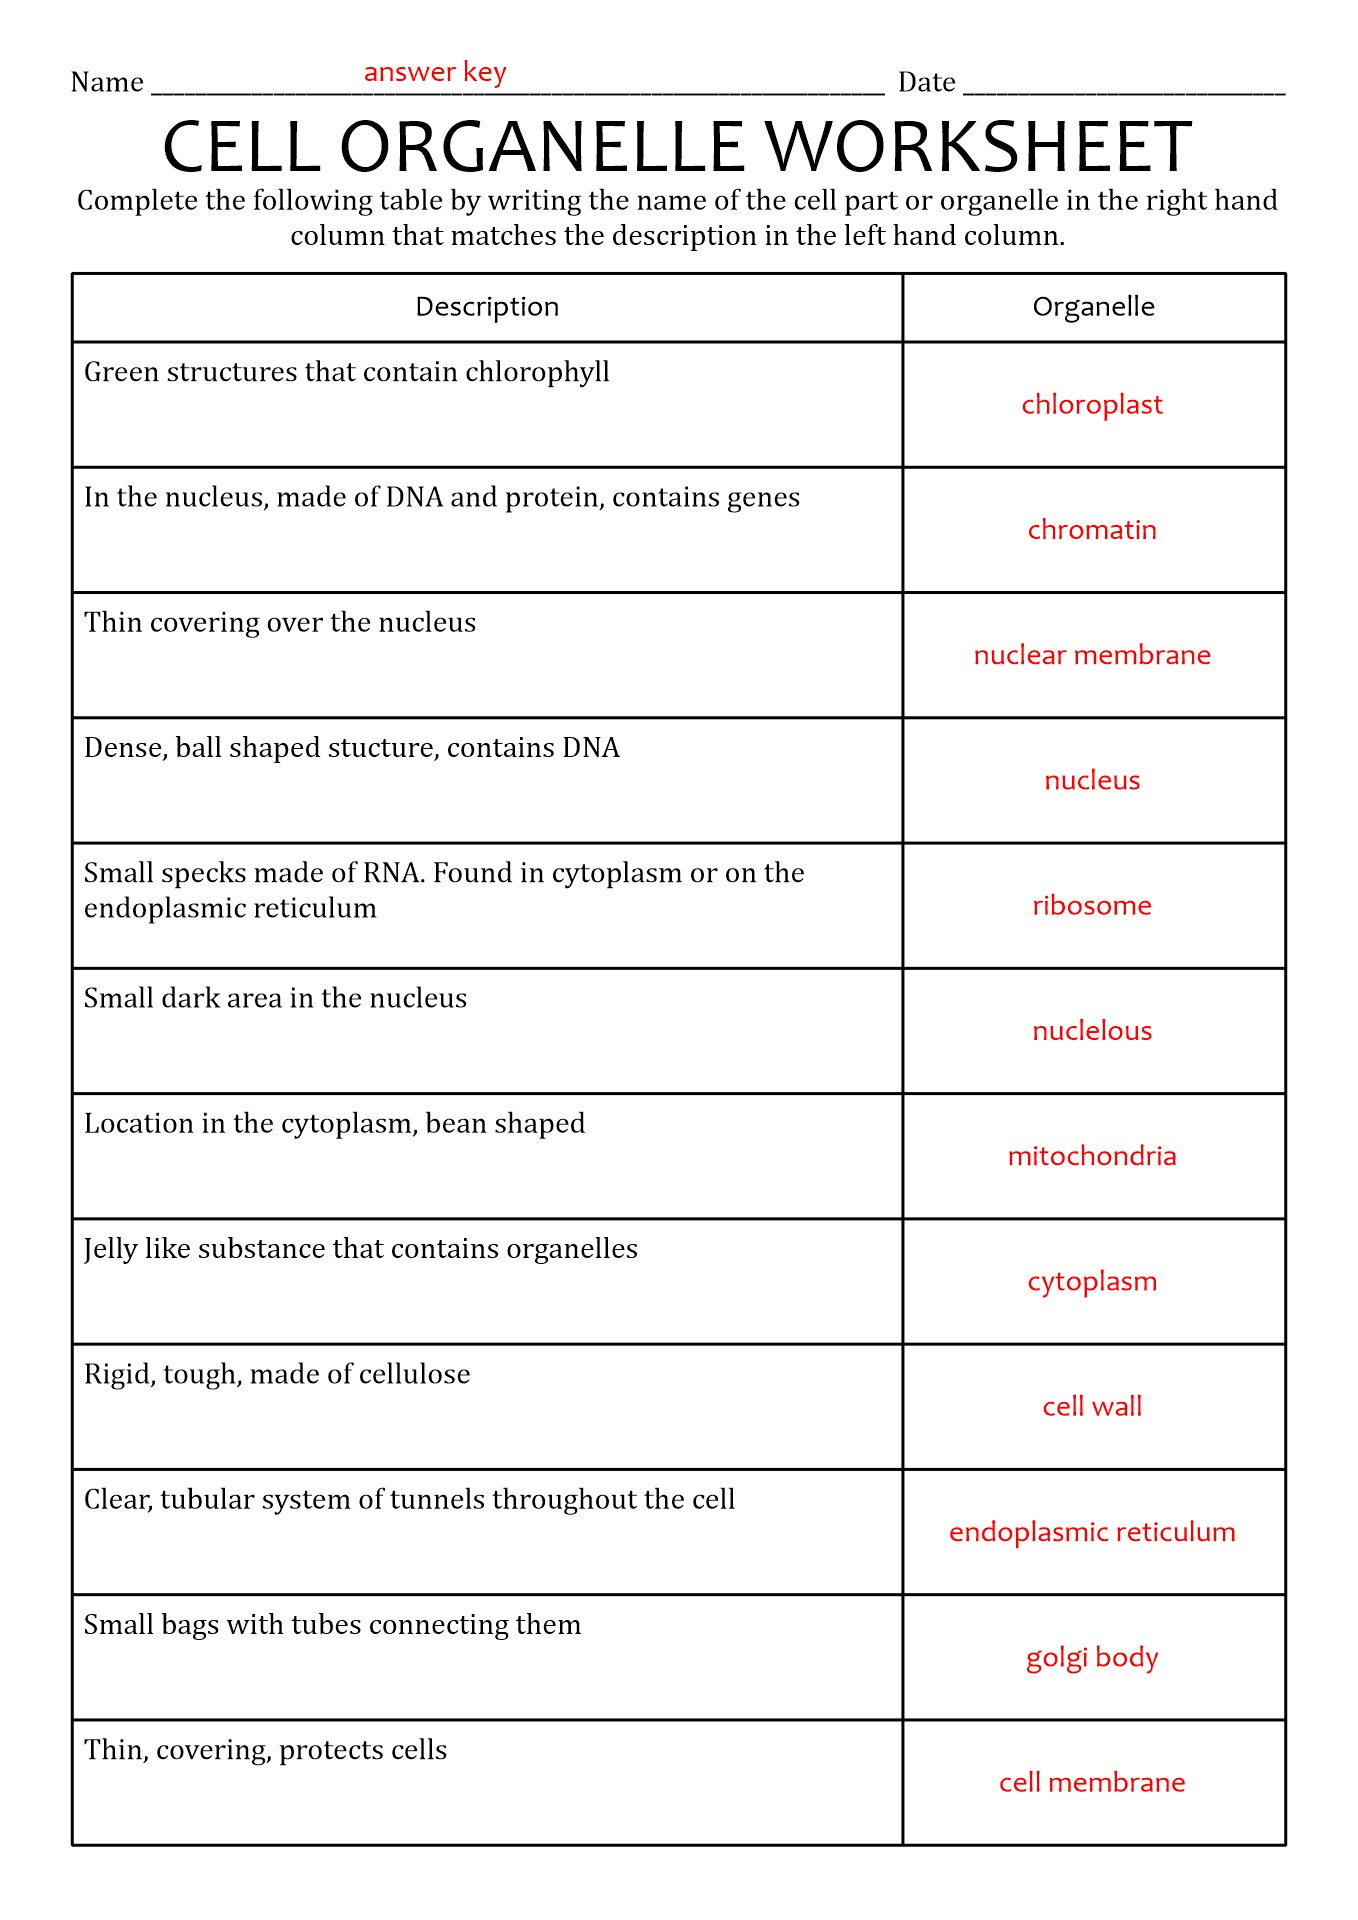 16-best-images-of-cells-and-their-organelles-worksheet-cell-organelles-worksheet-answer-key